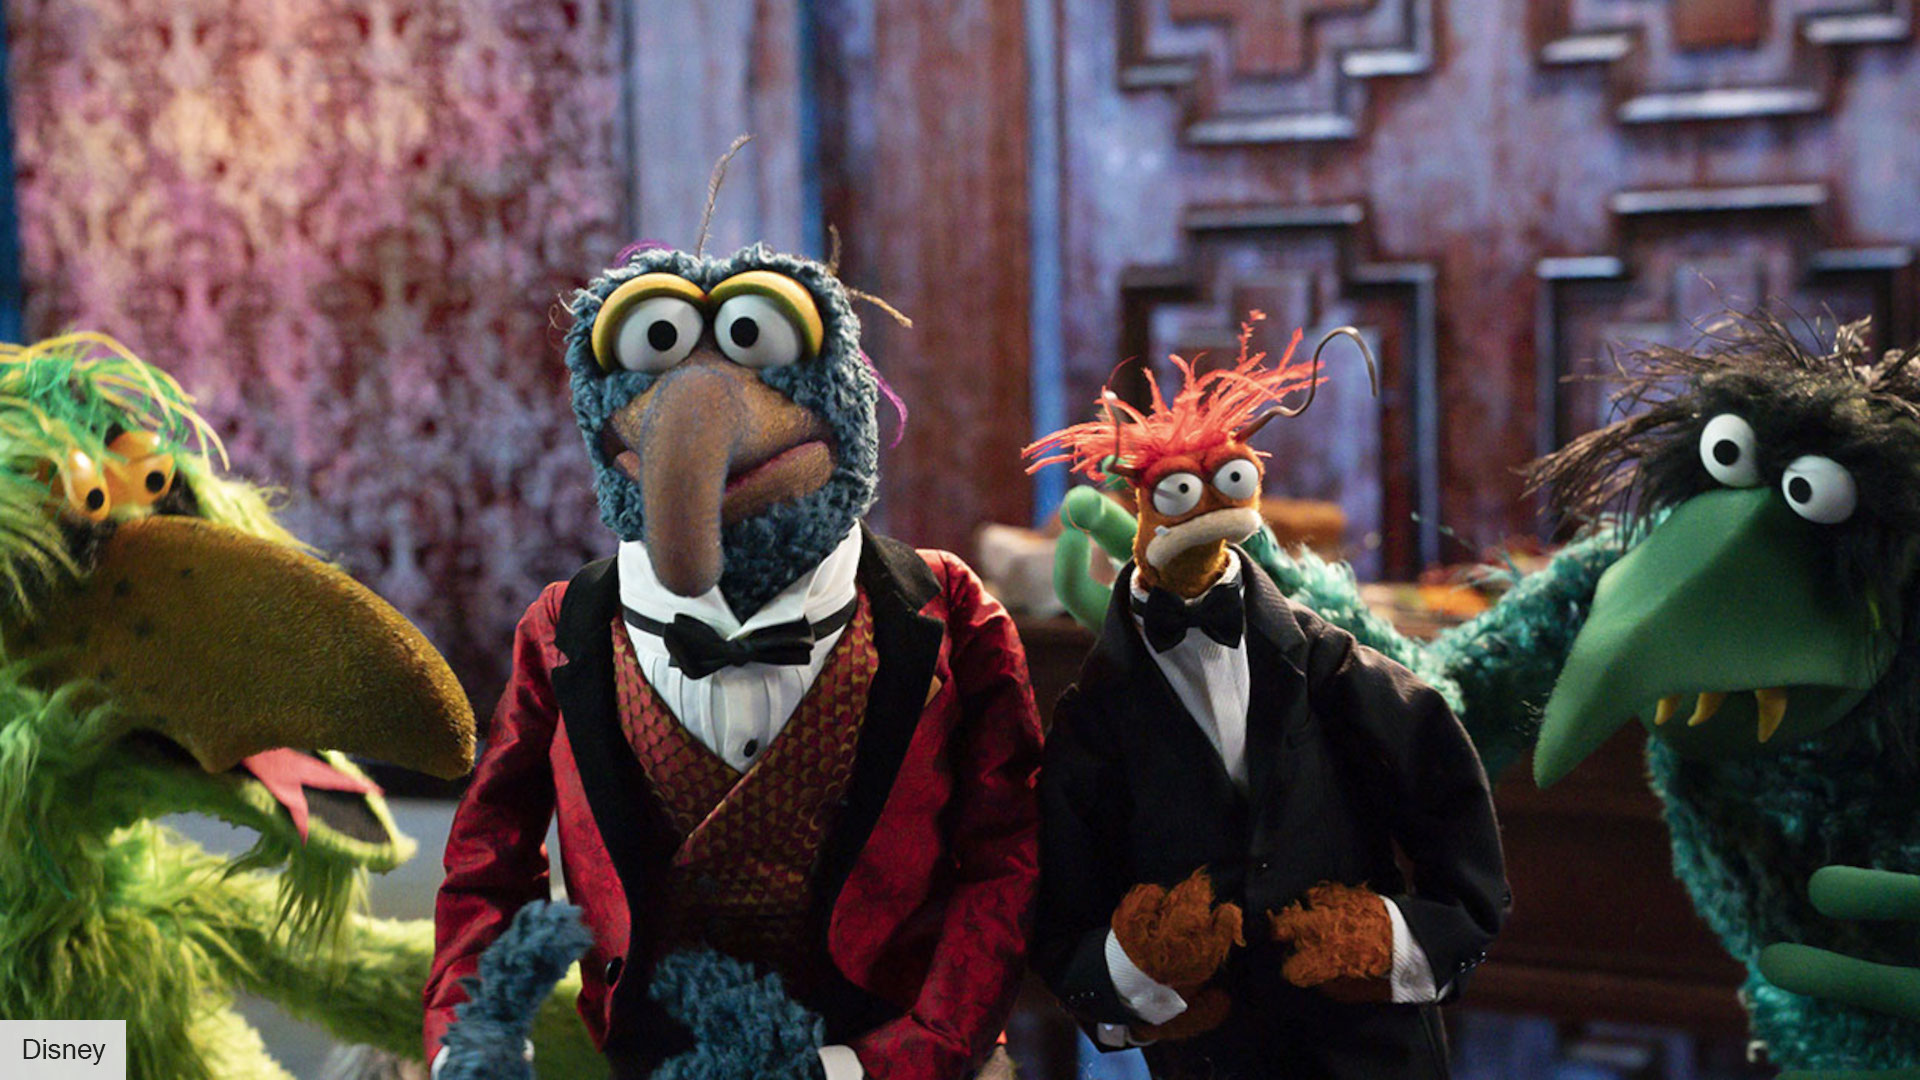 Muppets Haunted Mansion is streaming now on Disney Plus